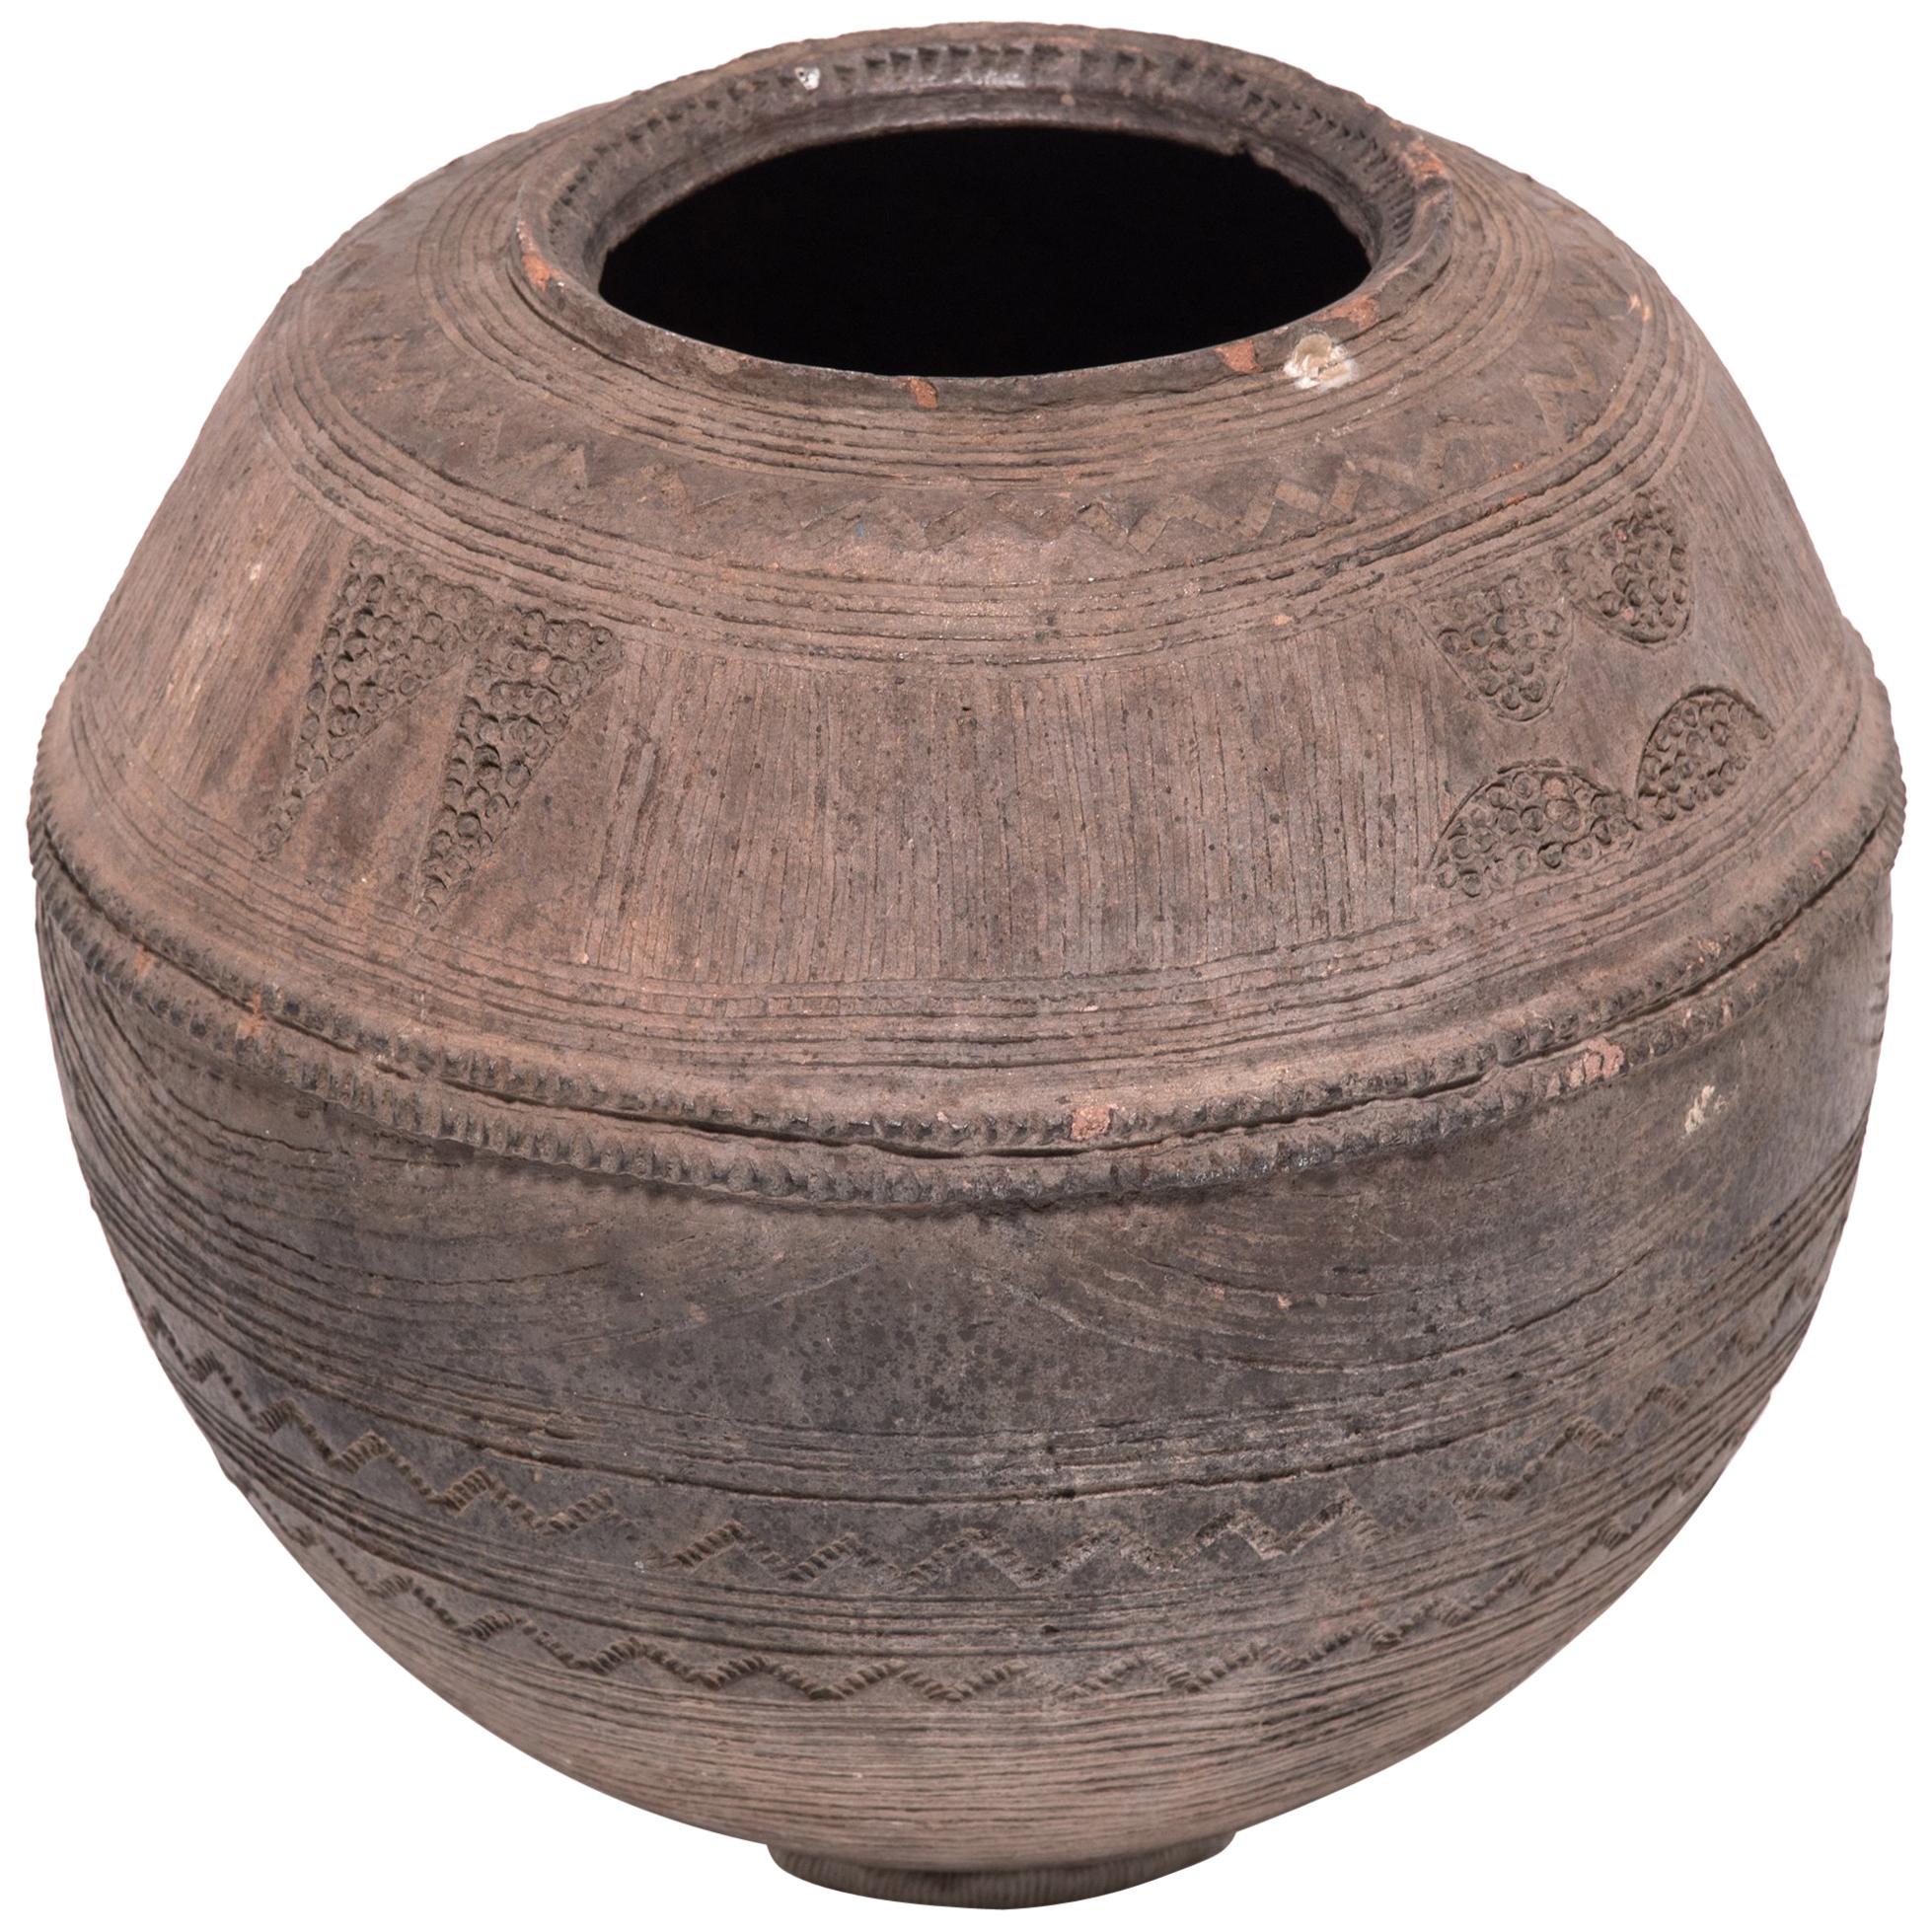 Nupe Incised Water Vessel